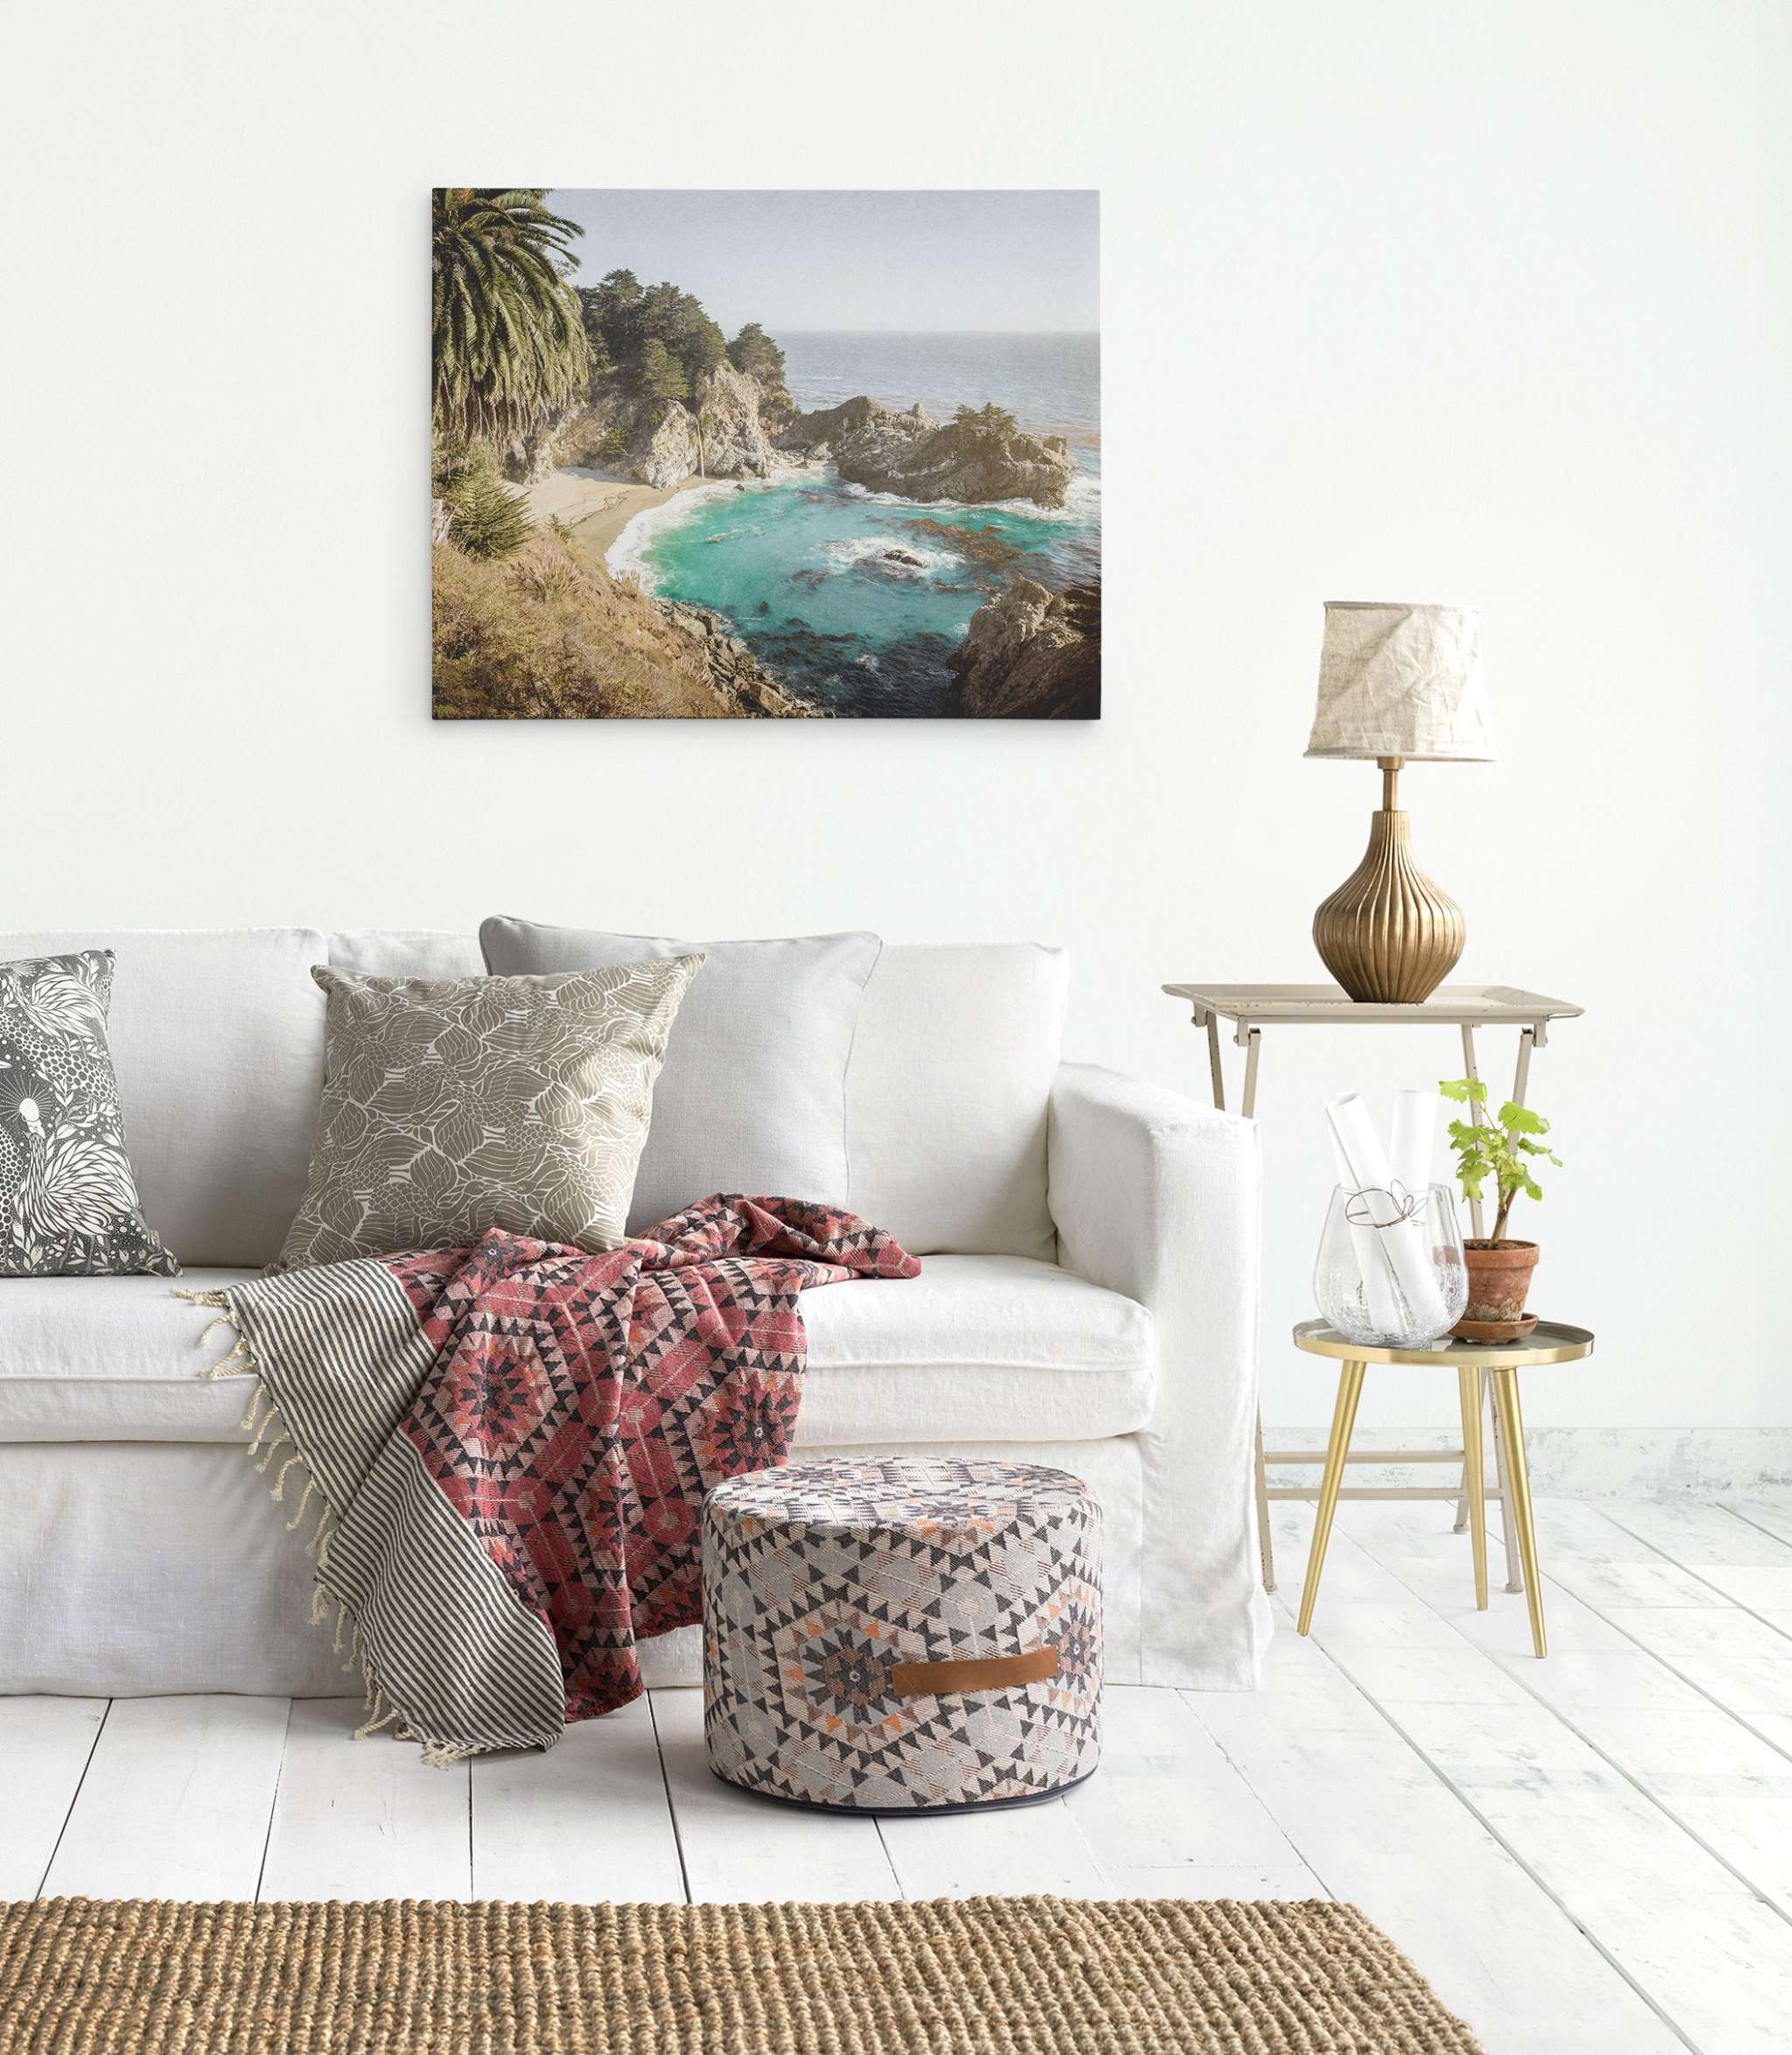 A stylish living room with a white sofa adorned with patterned cushions and a red patterned throw. A round patterned ottoman sits on a textured rug. A side table with a bottle vase, plant, and lamp is nearby. Offley Green's Big Sur Canvas Wall Art, 'Julia Pffeifer' featuring the Pacific Coast Highway waterfall hangs above as a stunning focal point.